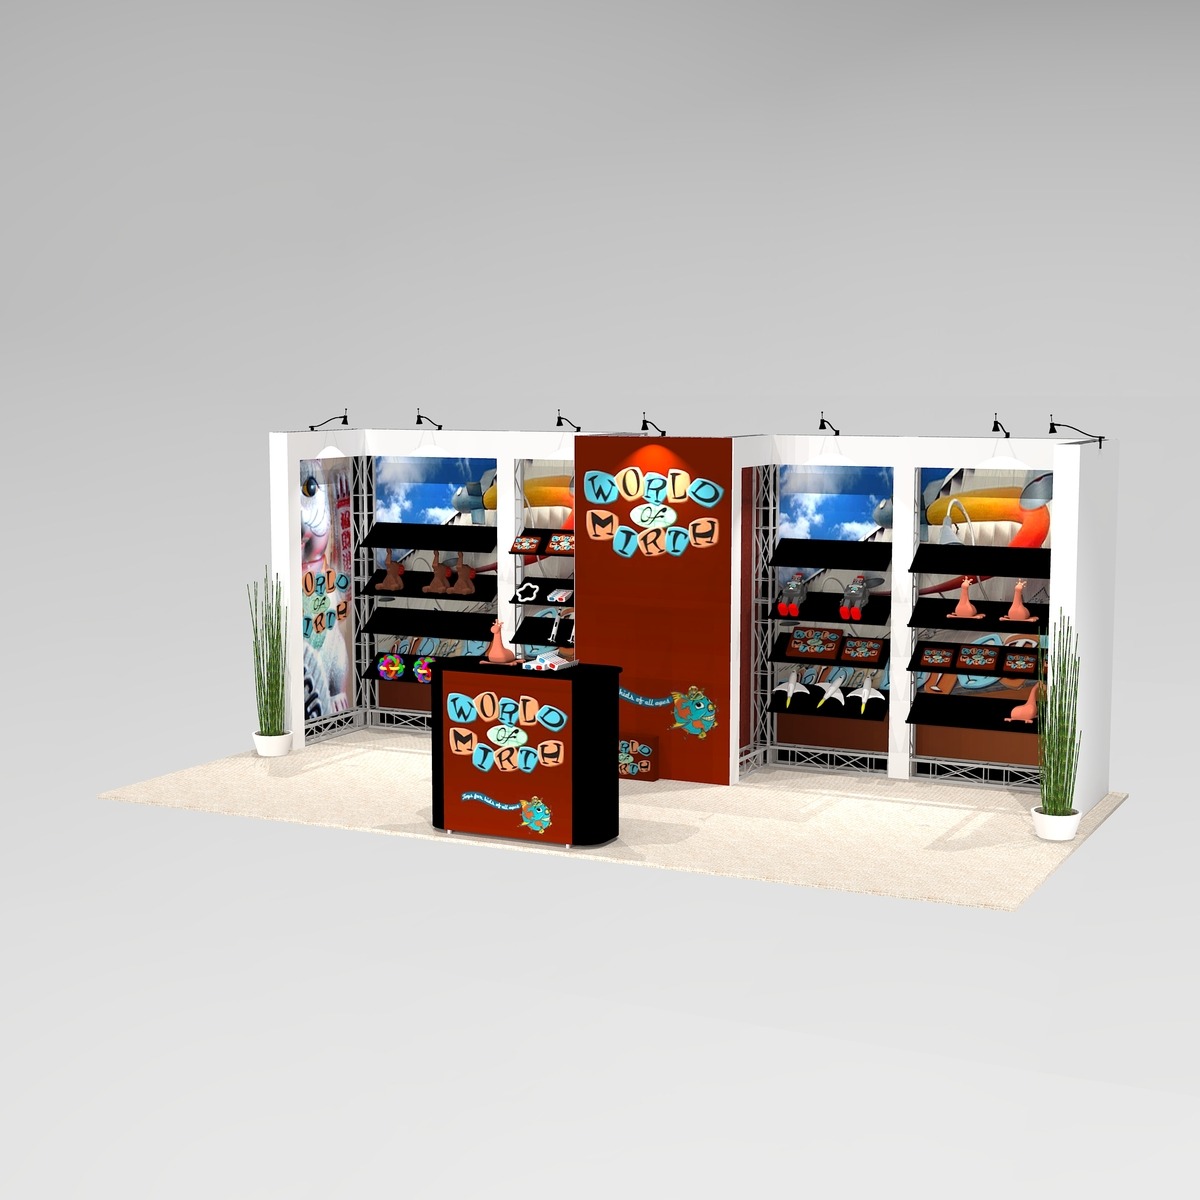 Recessed shelving trade show exhibit design MONT1020 Graphic Package C